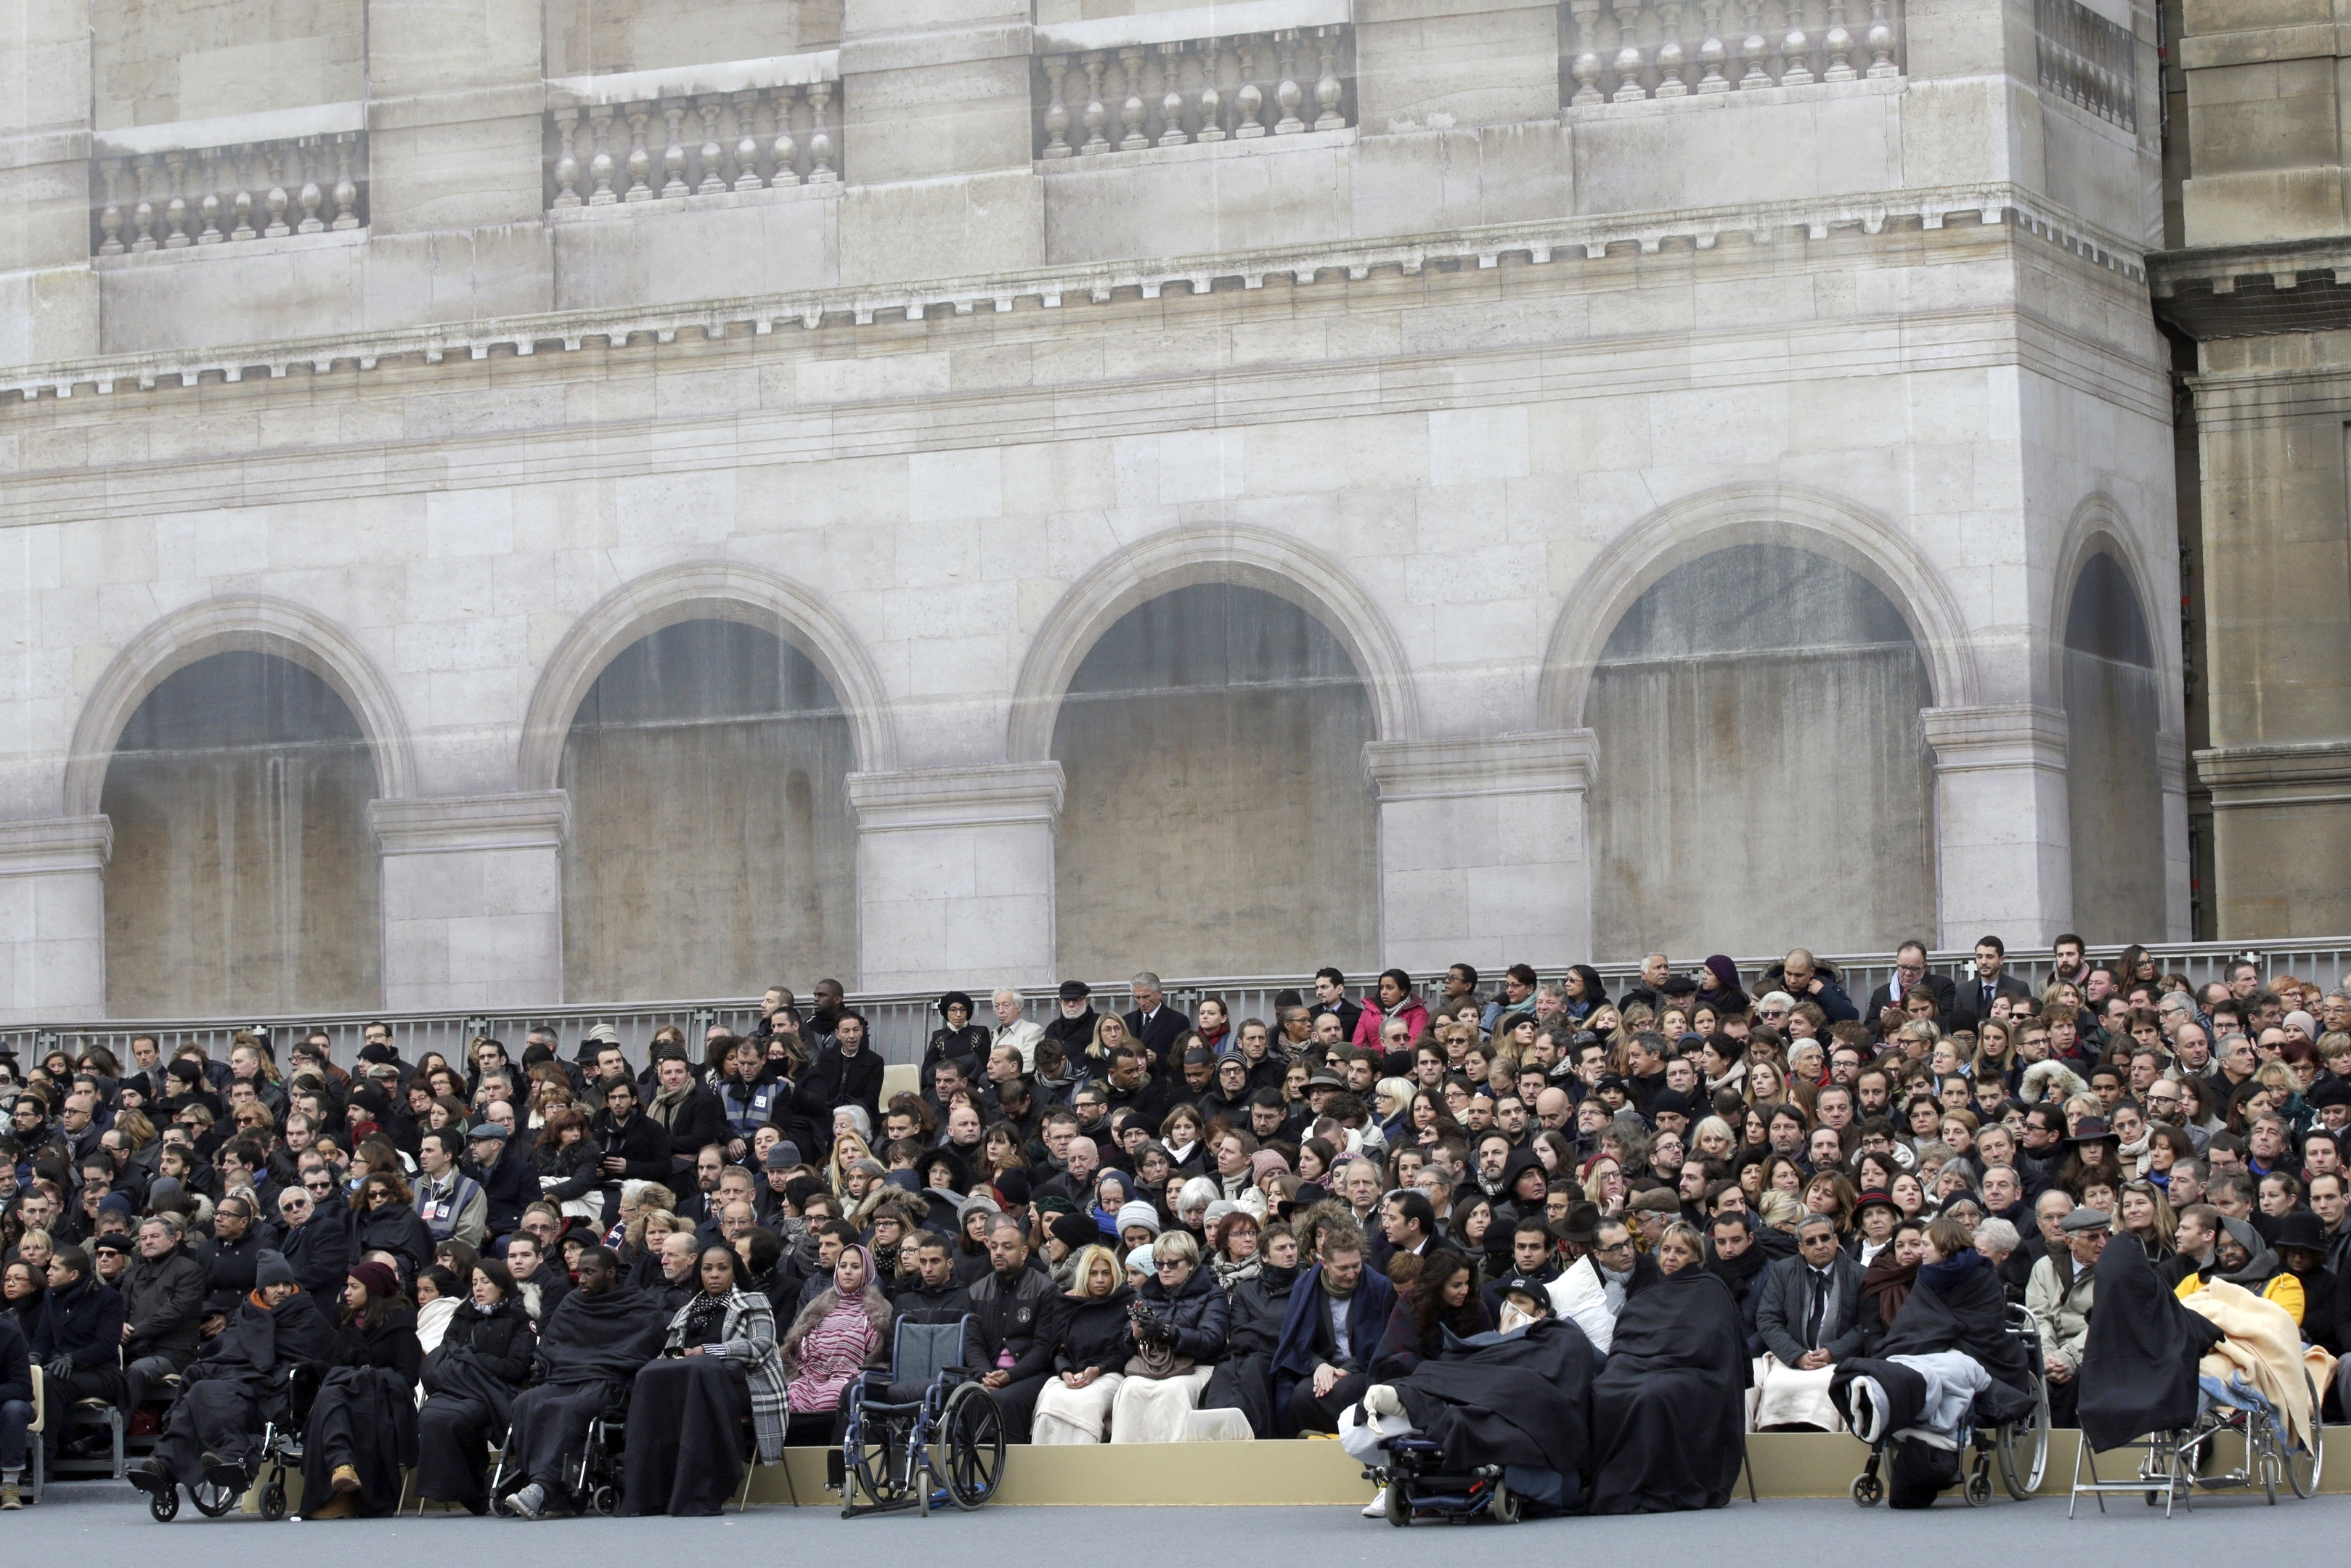 Families and relatives of the victims and people wounded during the attacks attend a ceremony to honor the 130 victims killed in the Nov. 13 attacks, in the courtyard of the Invalides in Paris, 